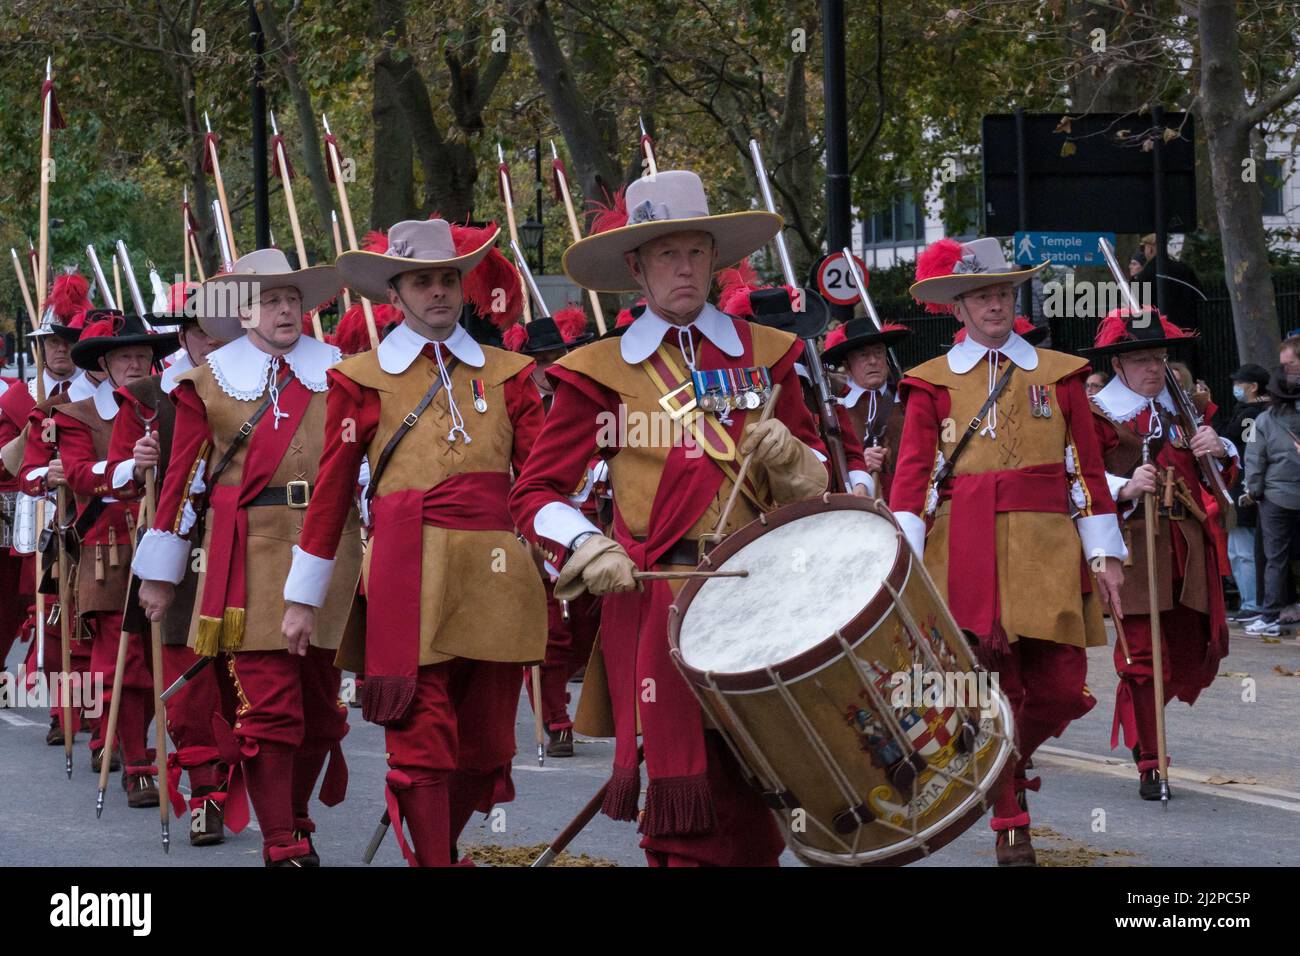 The Company of Pikemen and Musketeers HAC playing snare drums as they march in the Lord Mayor’s Show, 2021 at Victoria Embankment, London England, UK Stock Photo